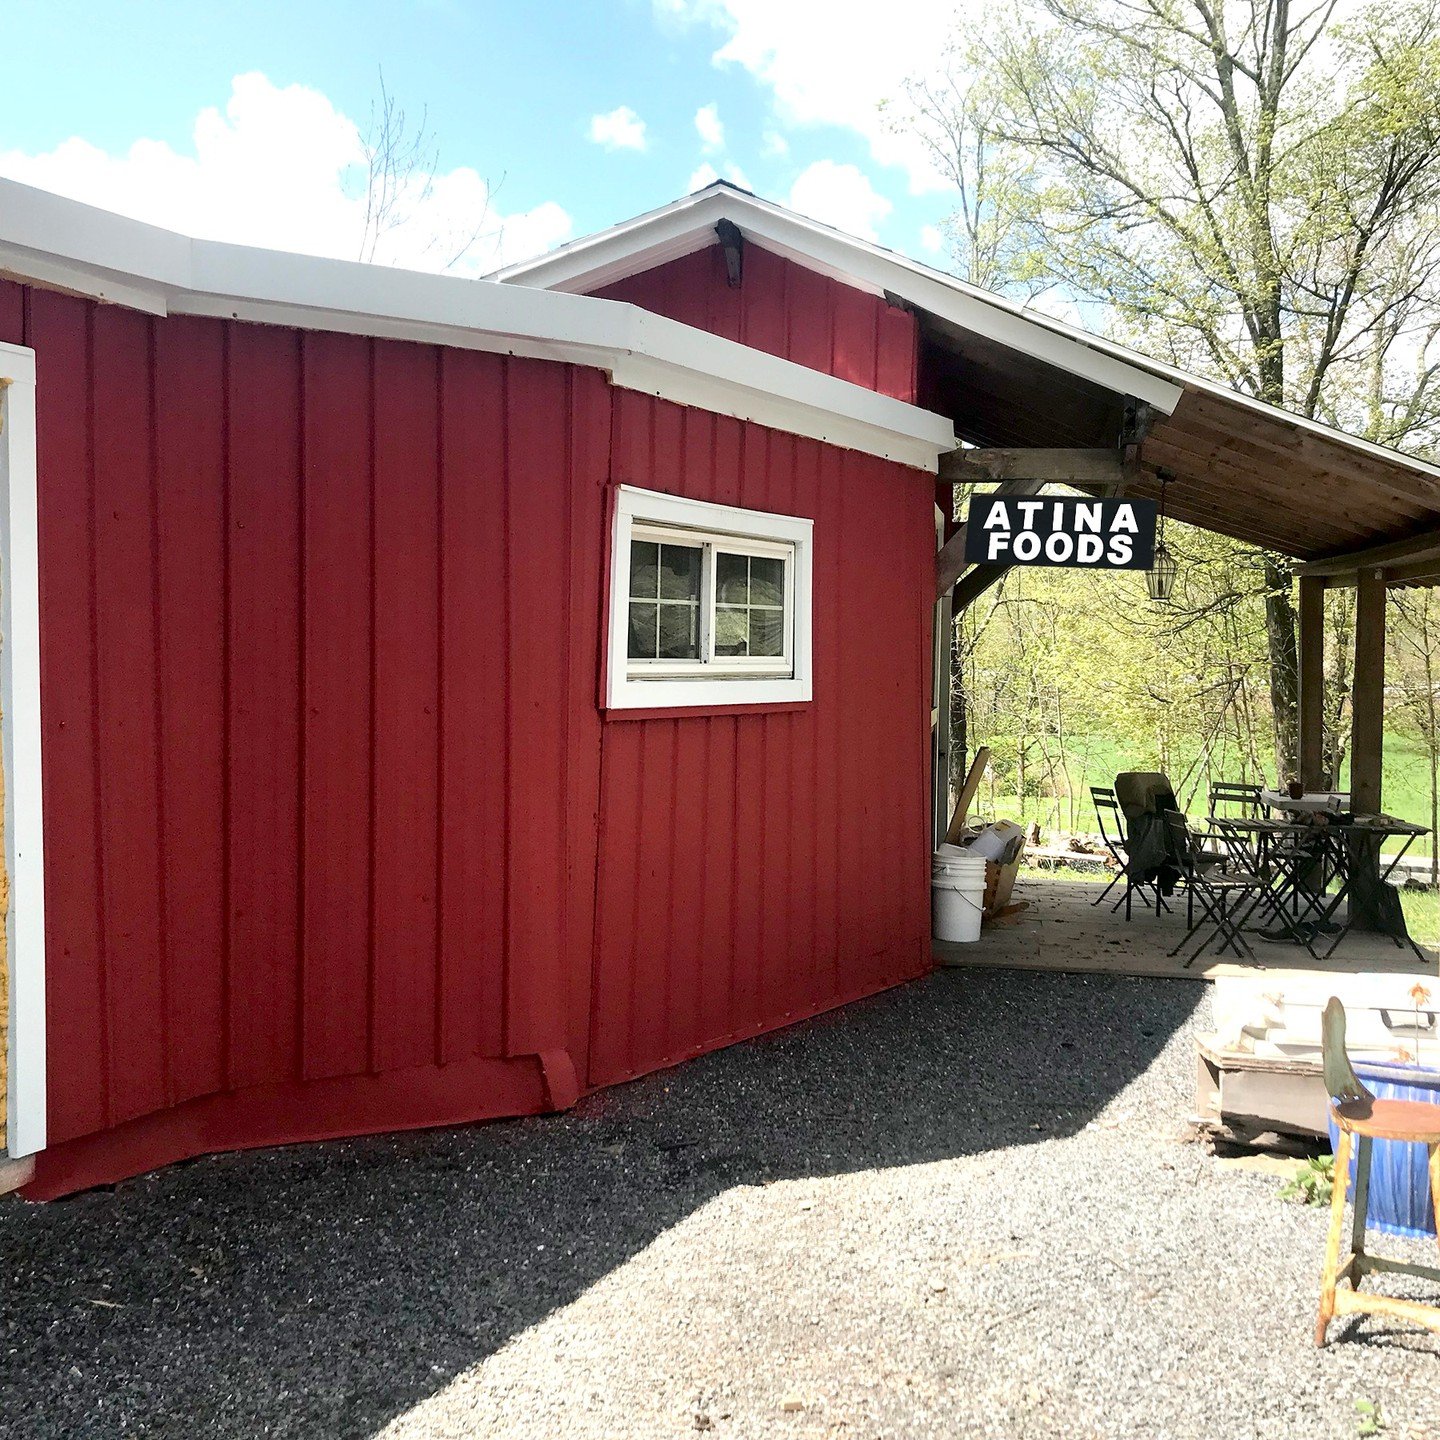 Have you Seen our new Studio Kitchen! It has come a long way - Goodbye beautiful clay oven, hello license! 
Ready for workshops and cookings. Can't wait to see you here! xo AF #outdoorkitchen #commericalkitchen #clayoven #pickles